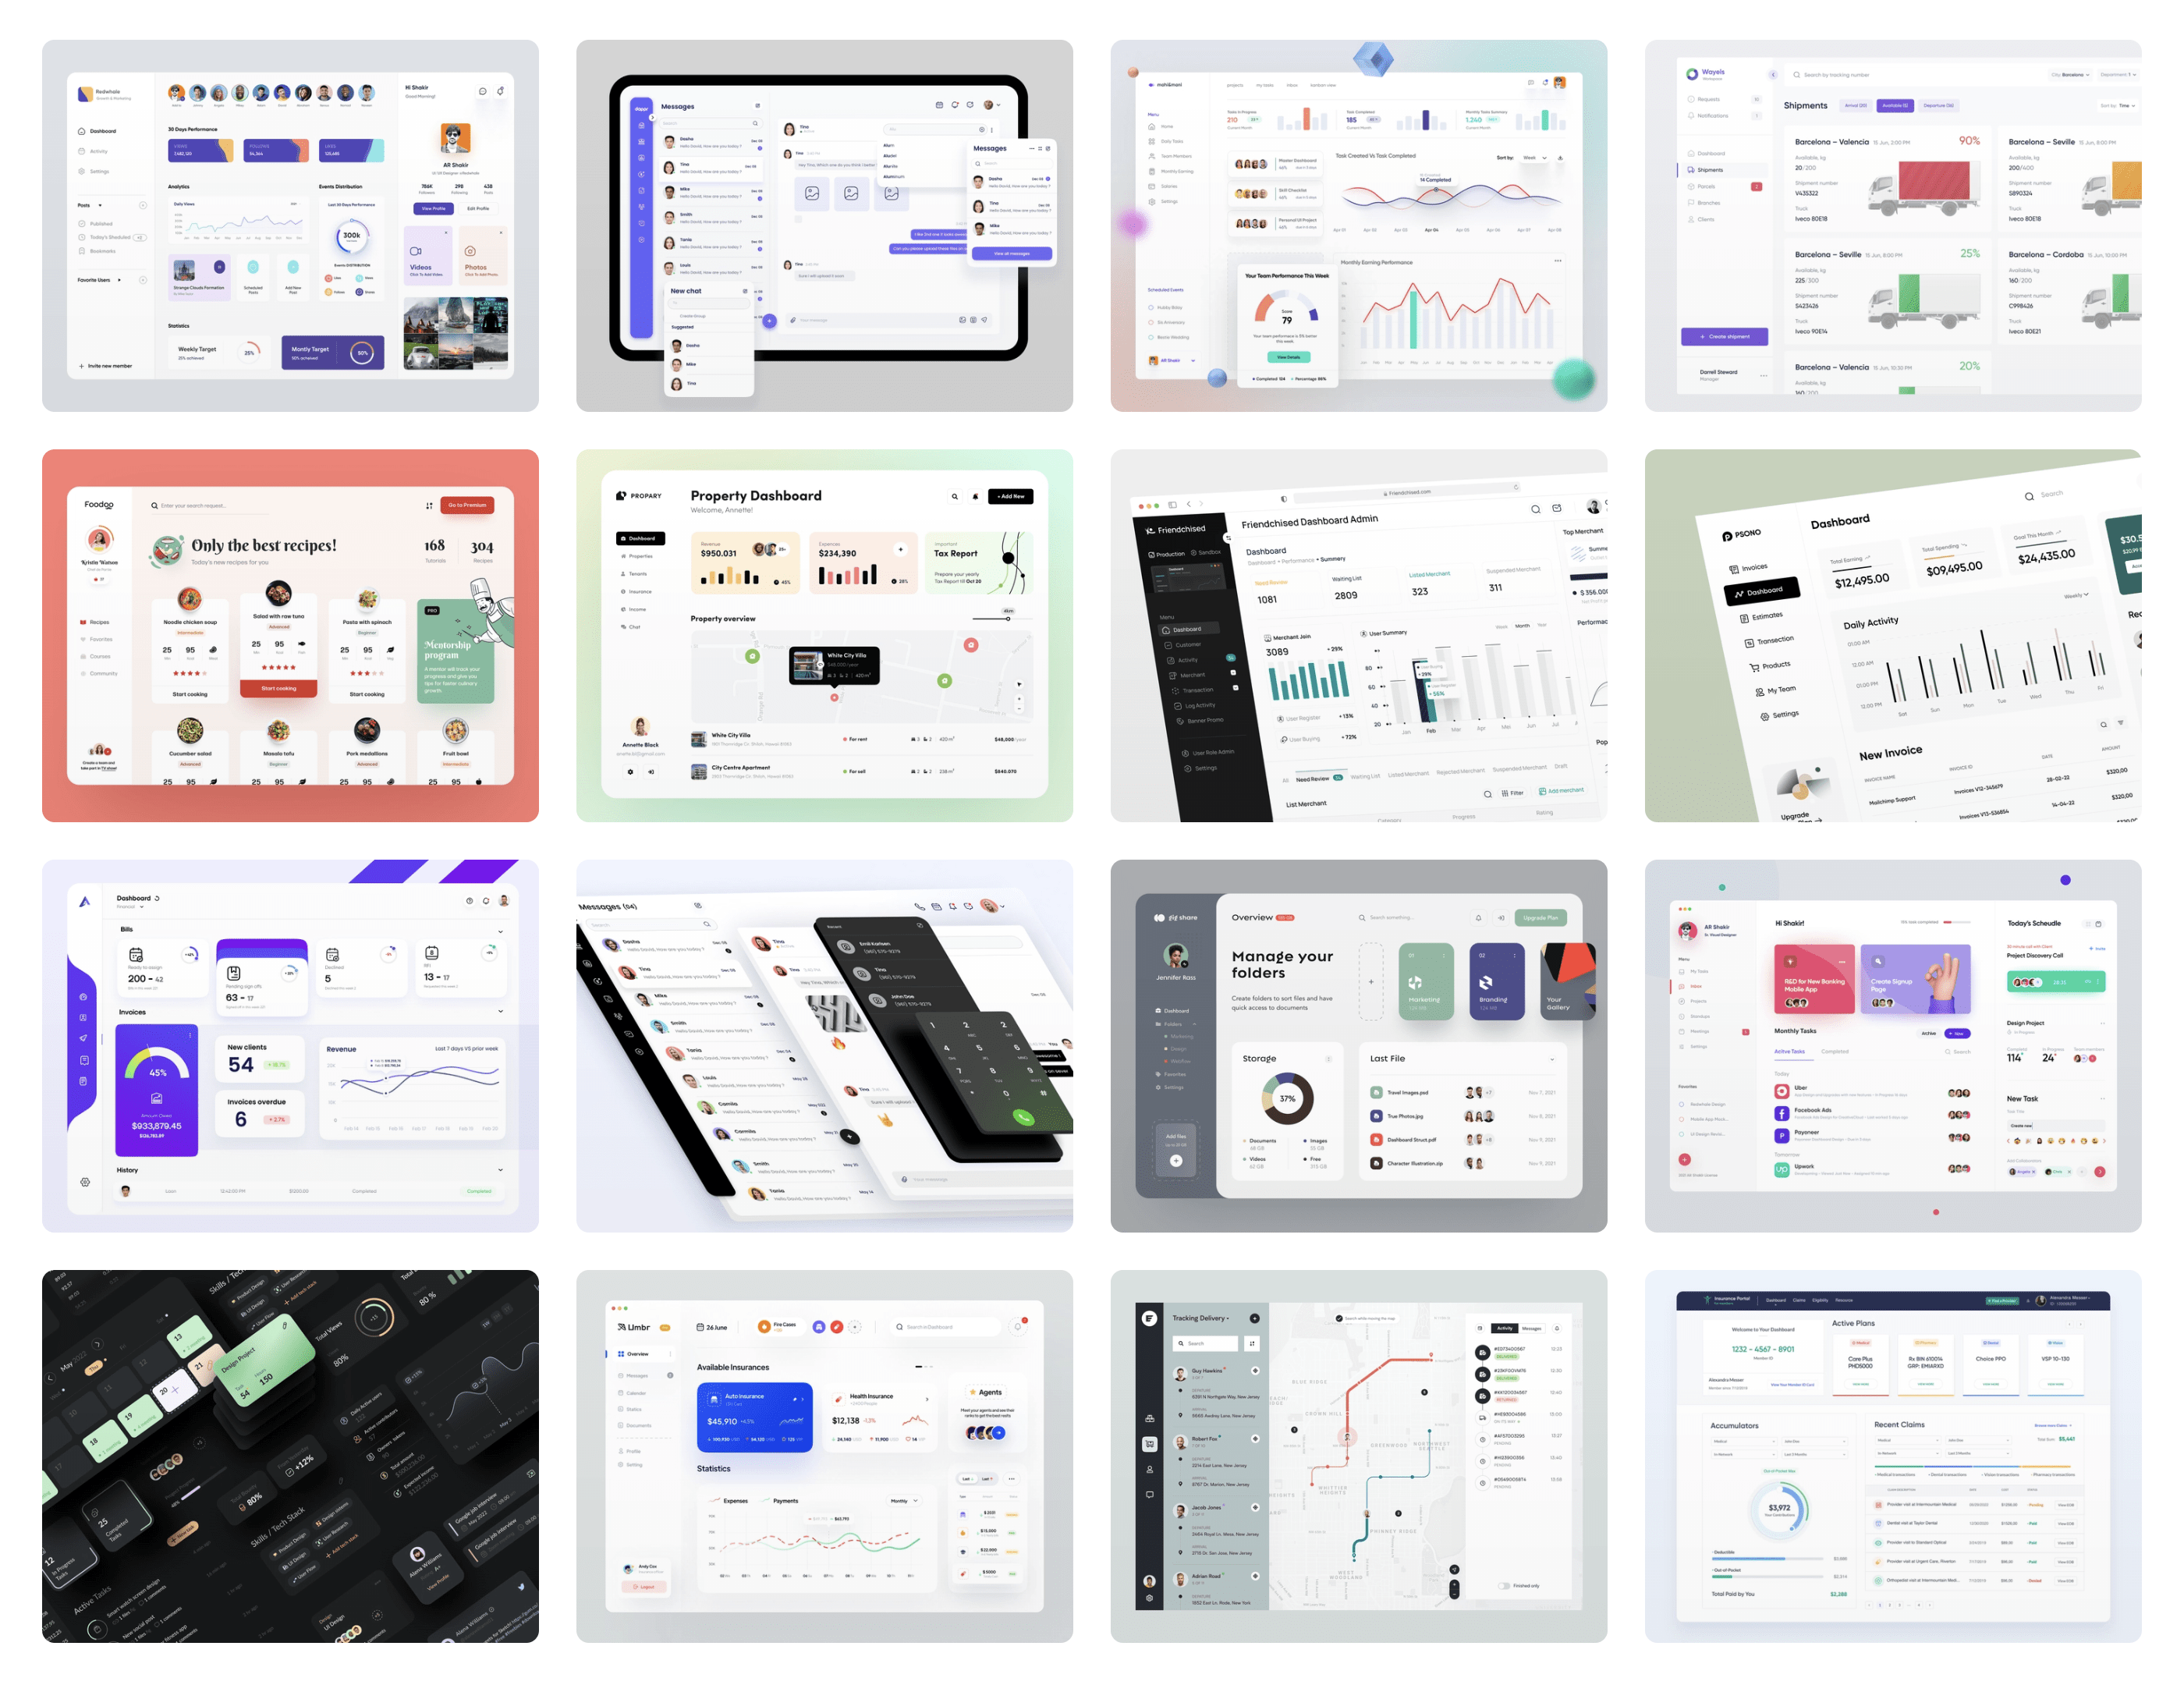 Screenshot of a variety of aesthetically-pleasing shots from Dribbble.